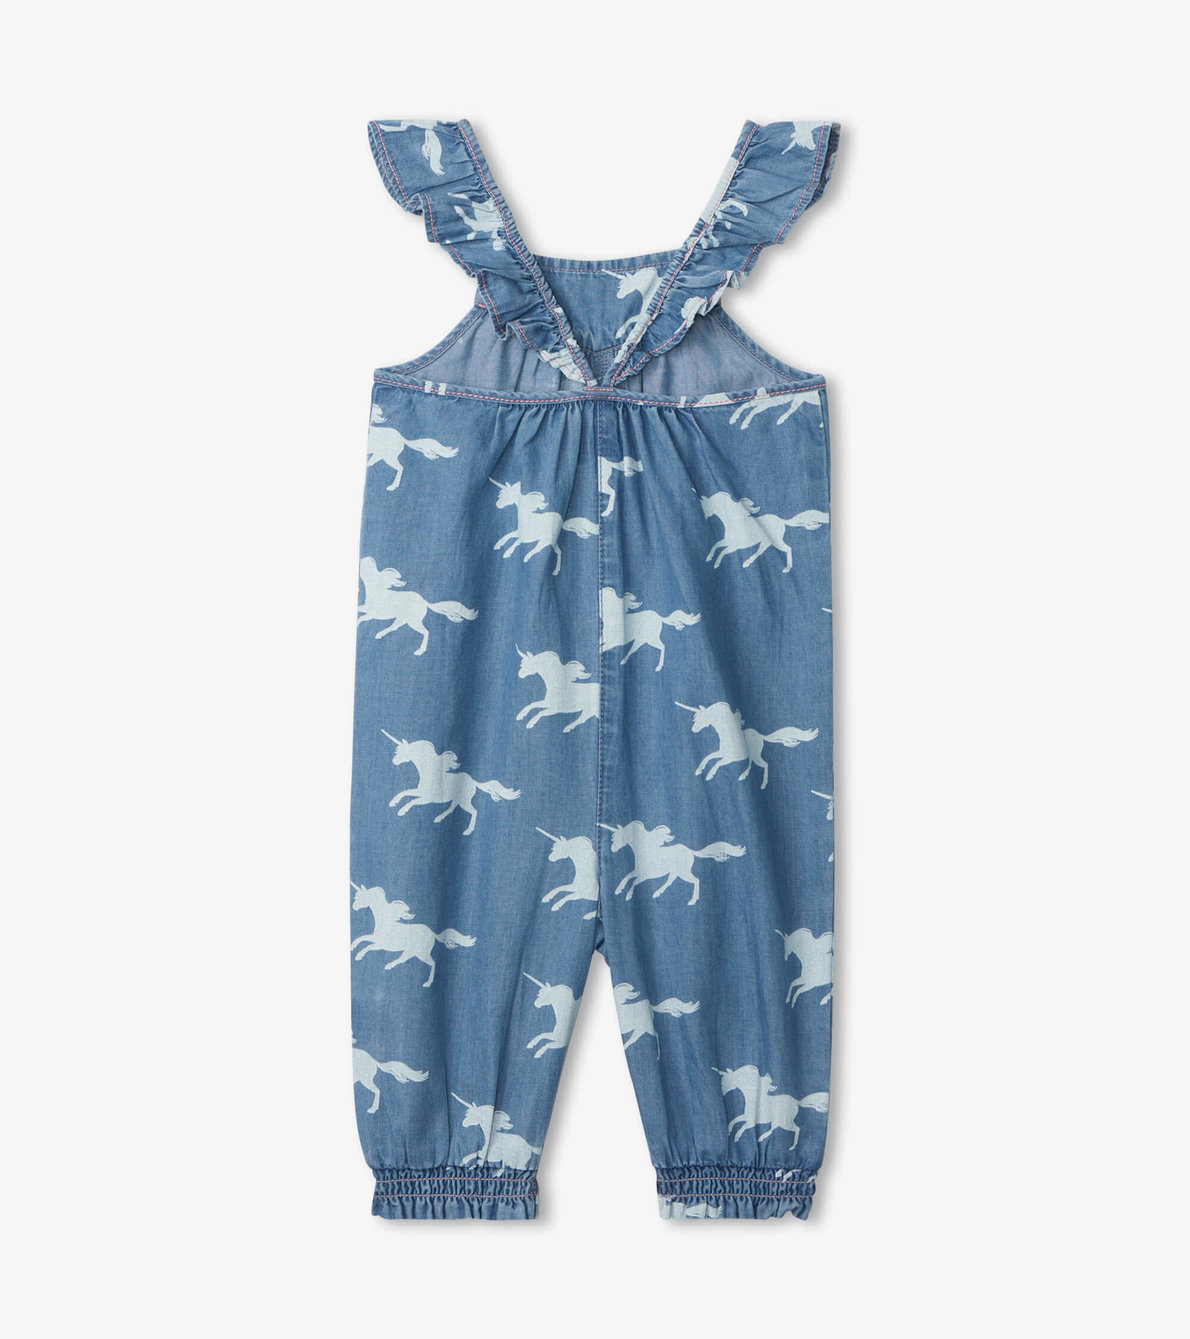 View larger image of Unicorn Silhouettes Baby Denim Romper